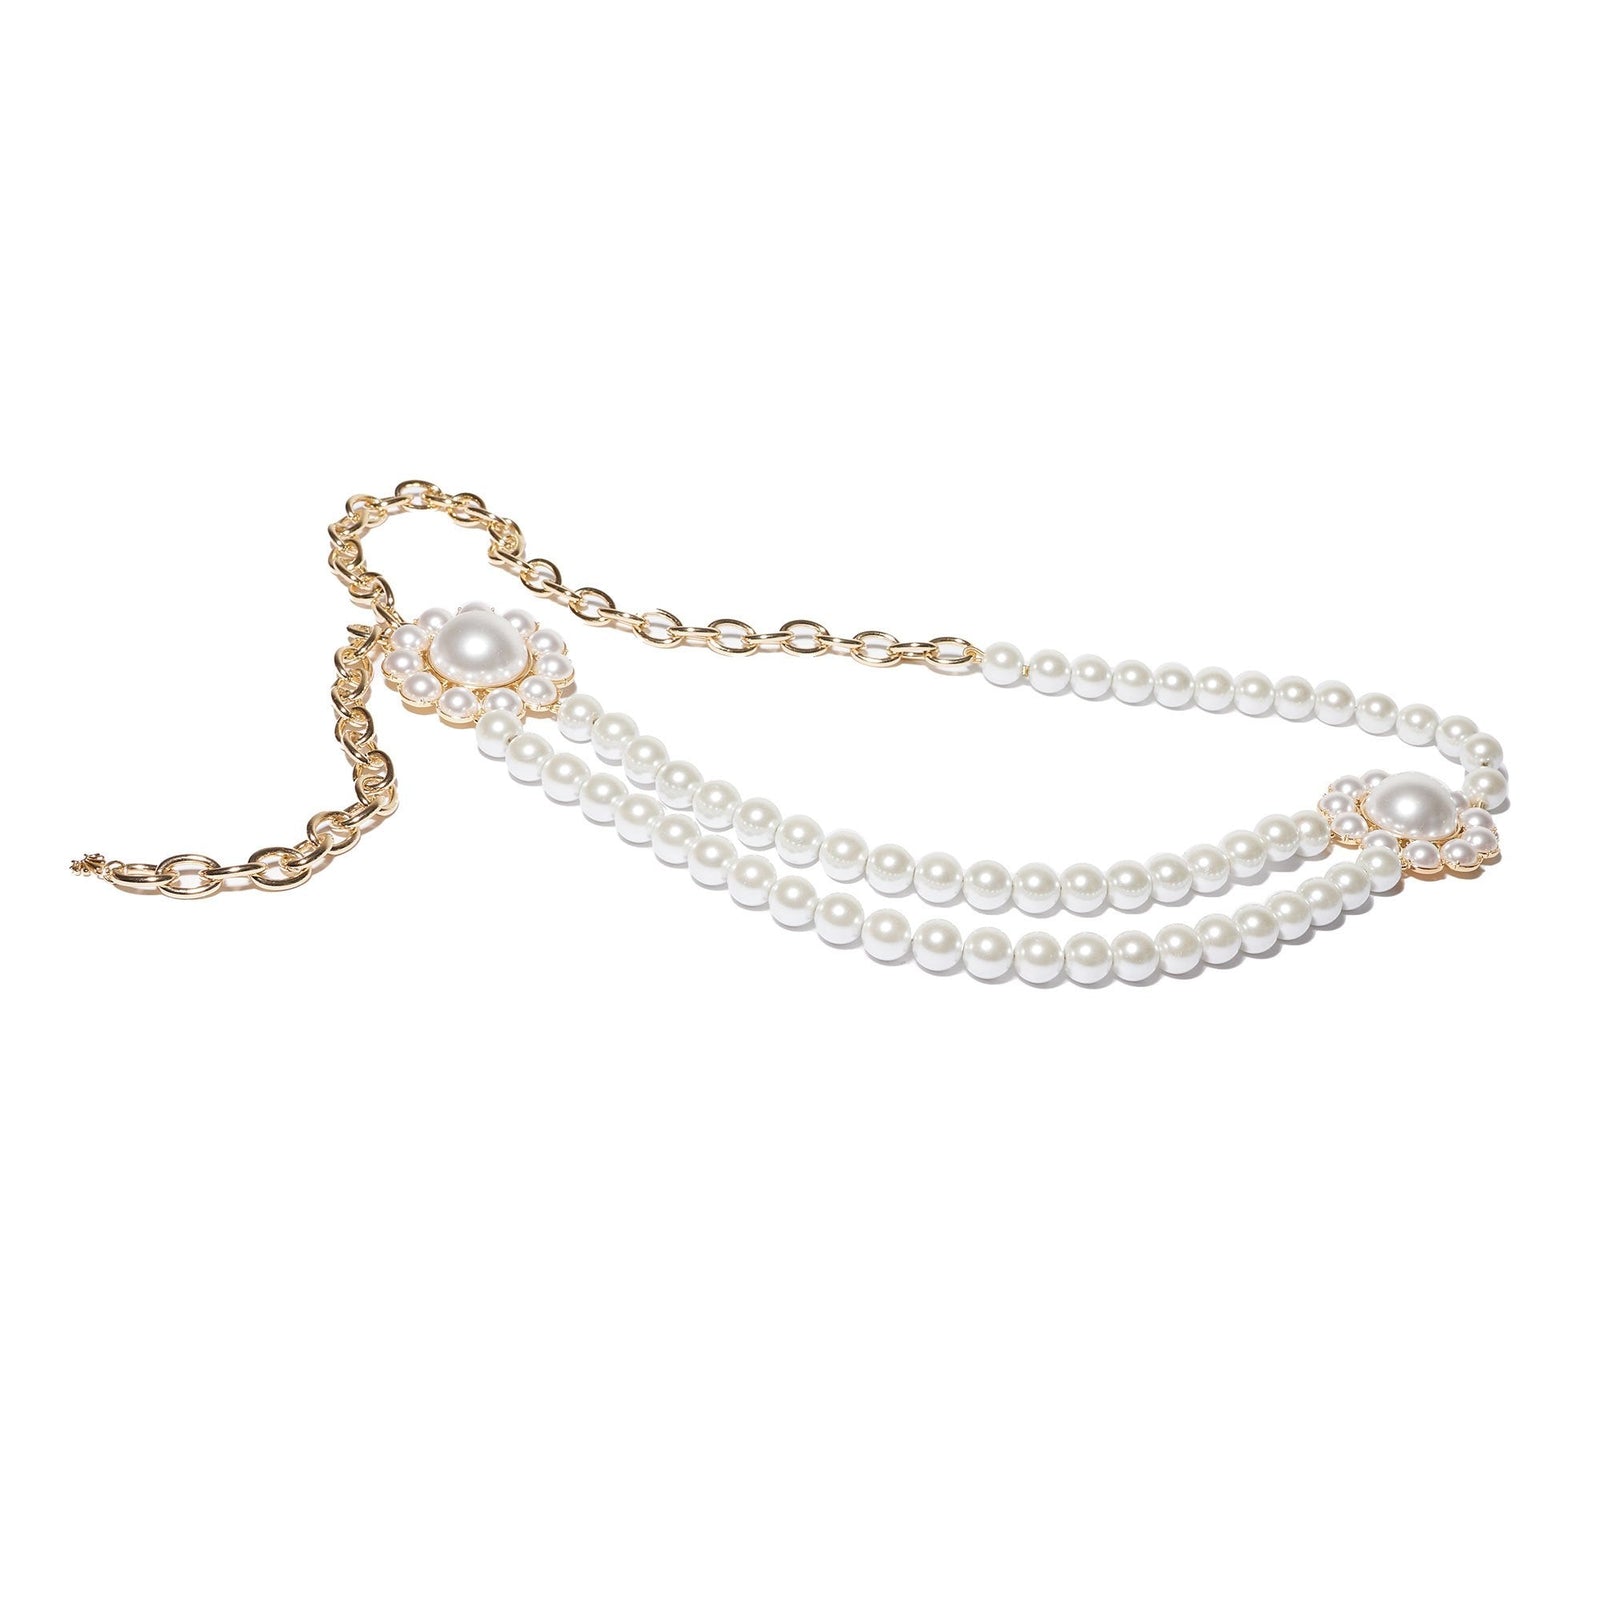 BISQUE FAUX LEATHER KNOTTED HEADBAND - Lele Sadoughi